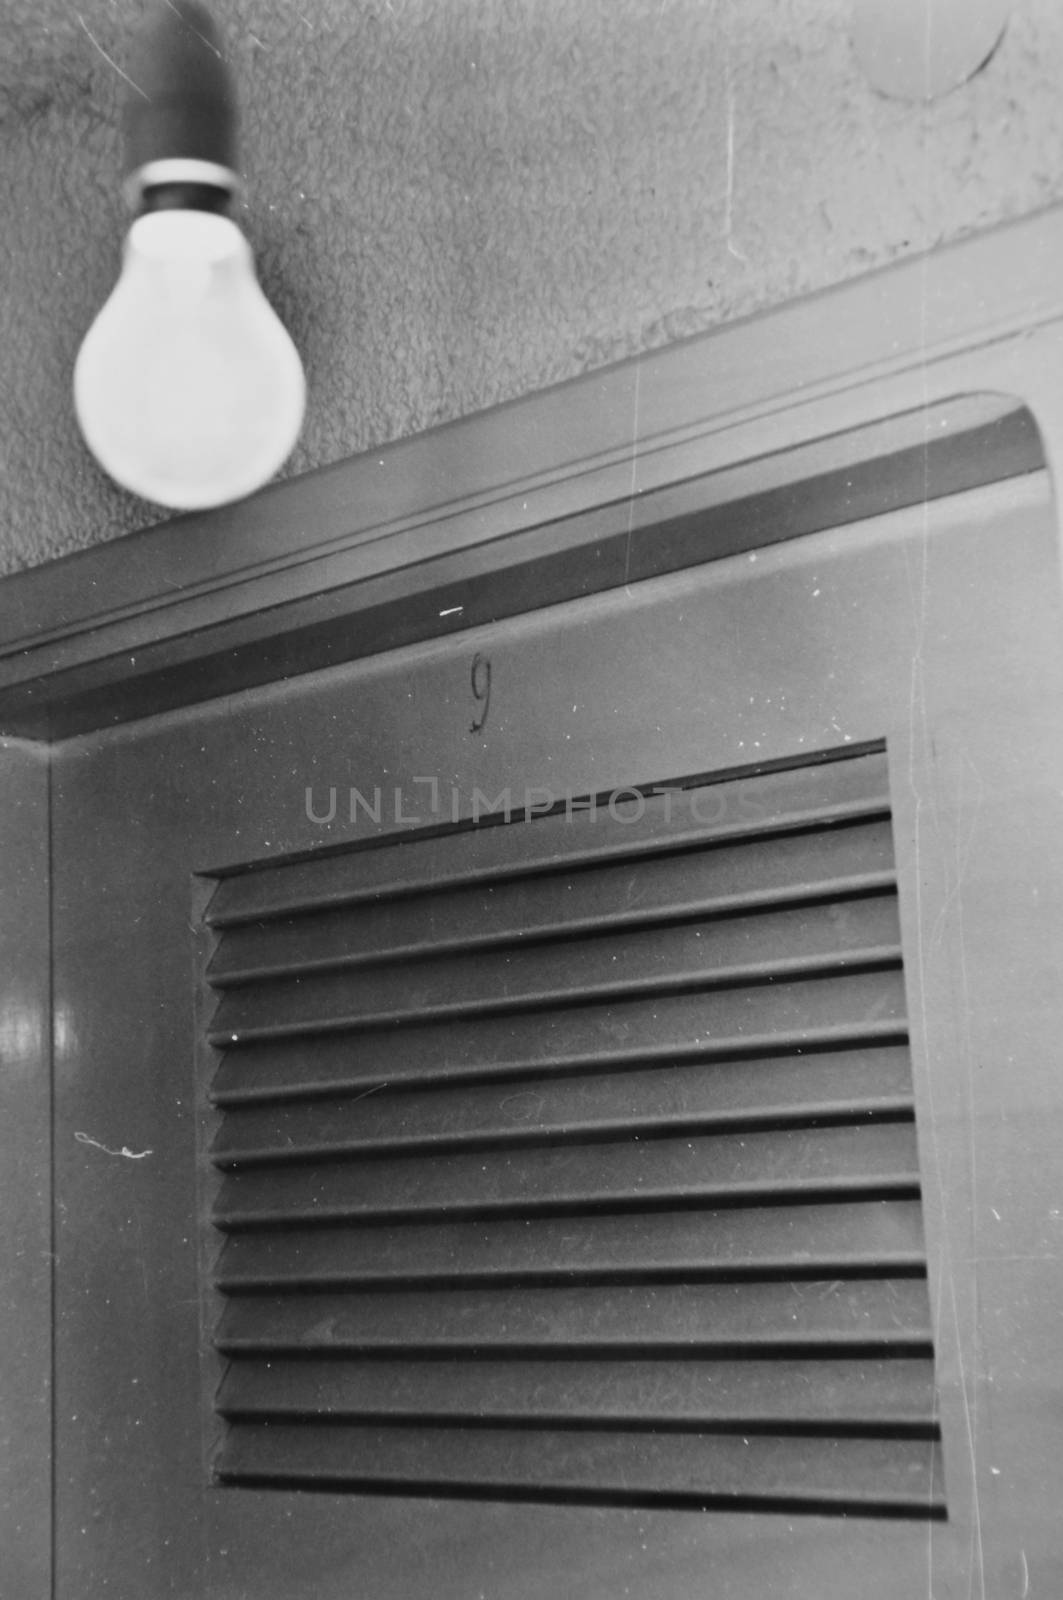 Light bulb and basement door. Black and white old grainy photo with dust and scratches.